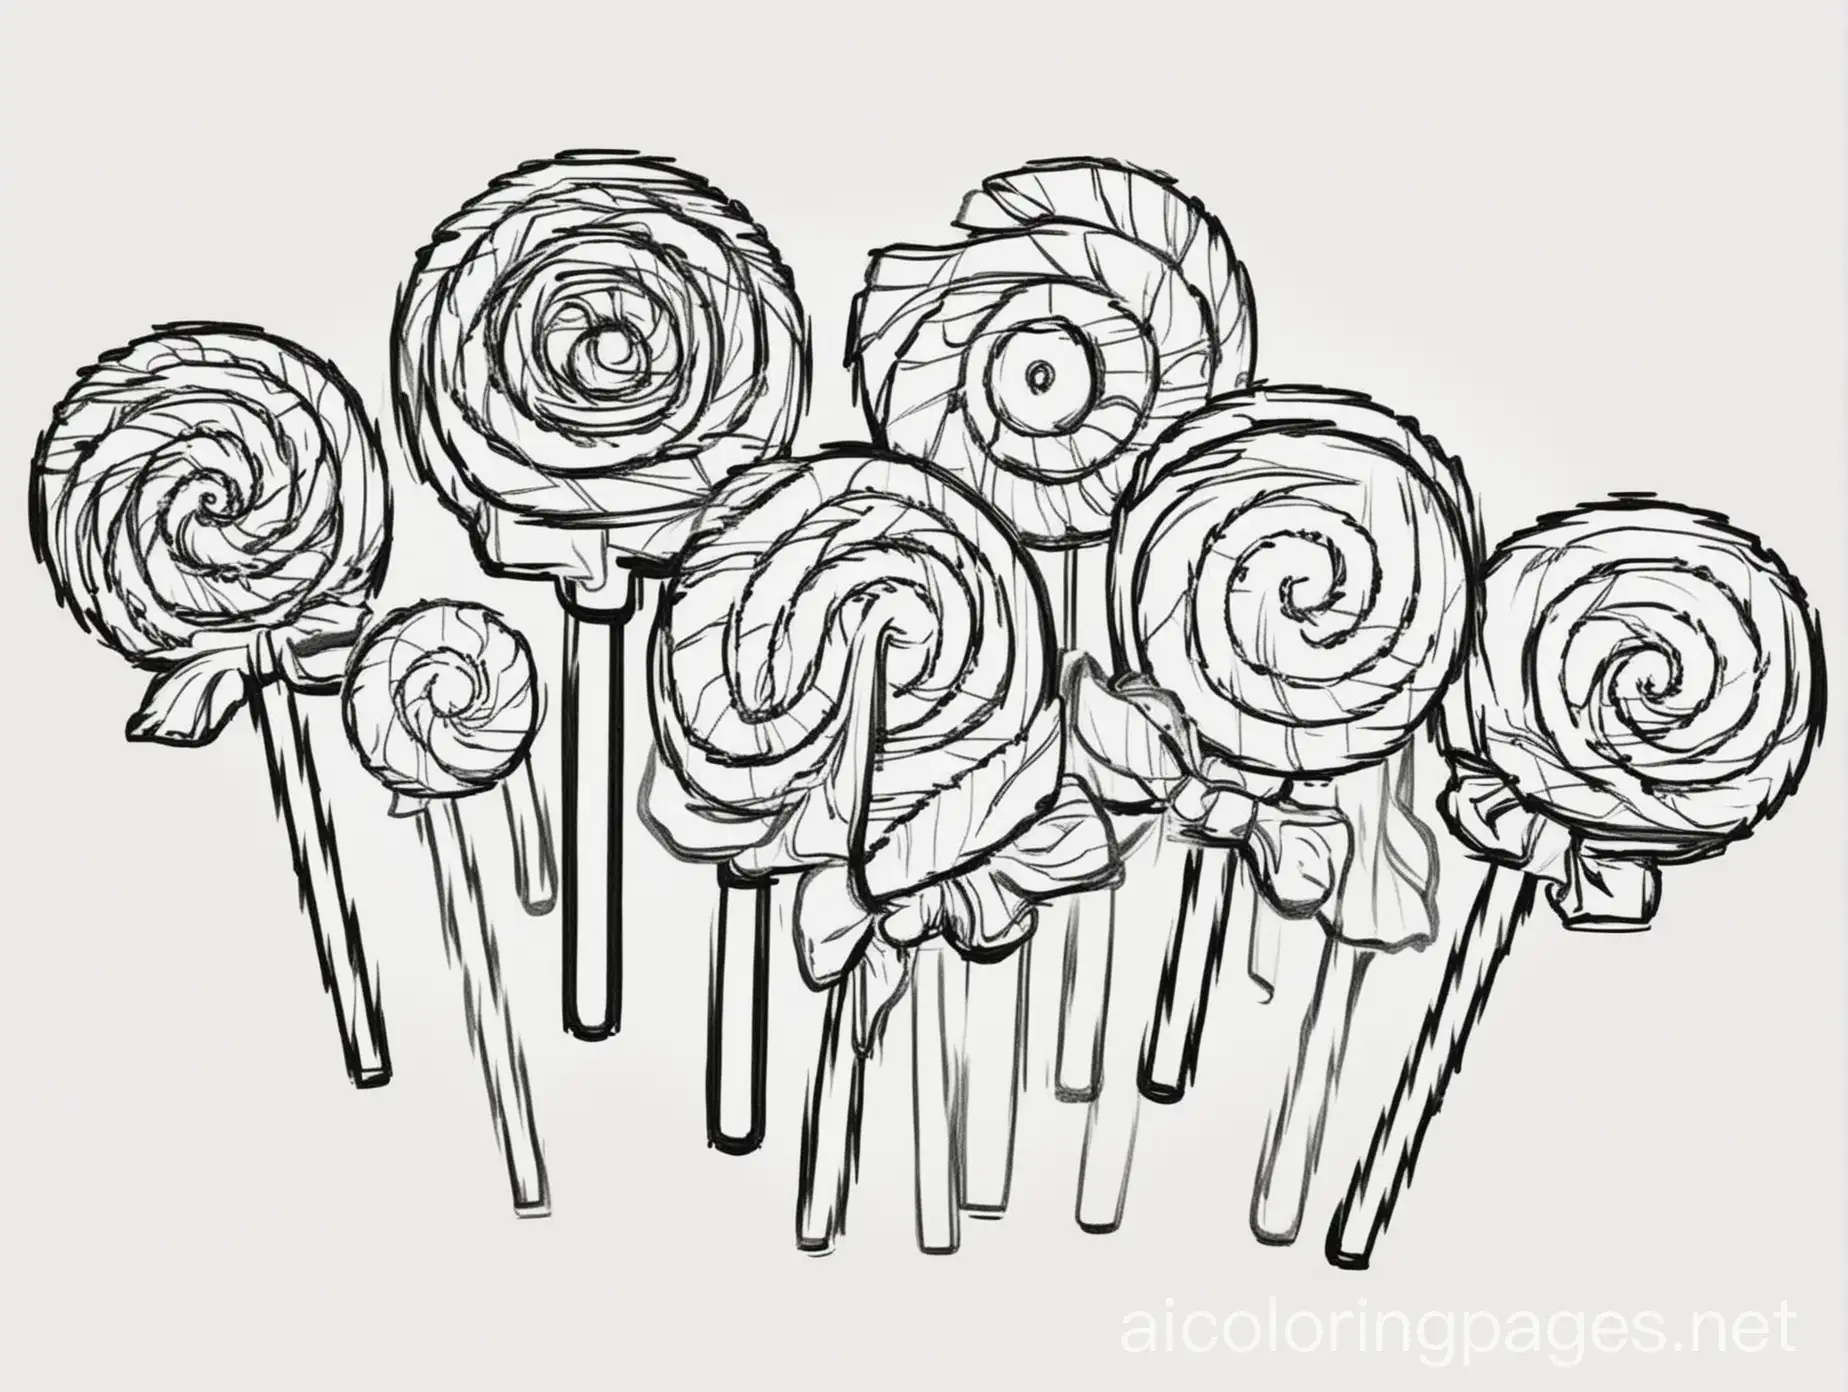 cartoon outlined only 
in black line of An assortment of candies like lollipops, wrapped candies, and gummies., Coloring Page, black and white, line art, white background, Simplicity, Ample White Space. The background of the coloring page is plain white to make it easy for young children to color within the lines. The outlines of all the subjects are easy to distinguish, making it simple for kids to color without too much difficulty